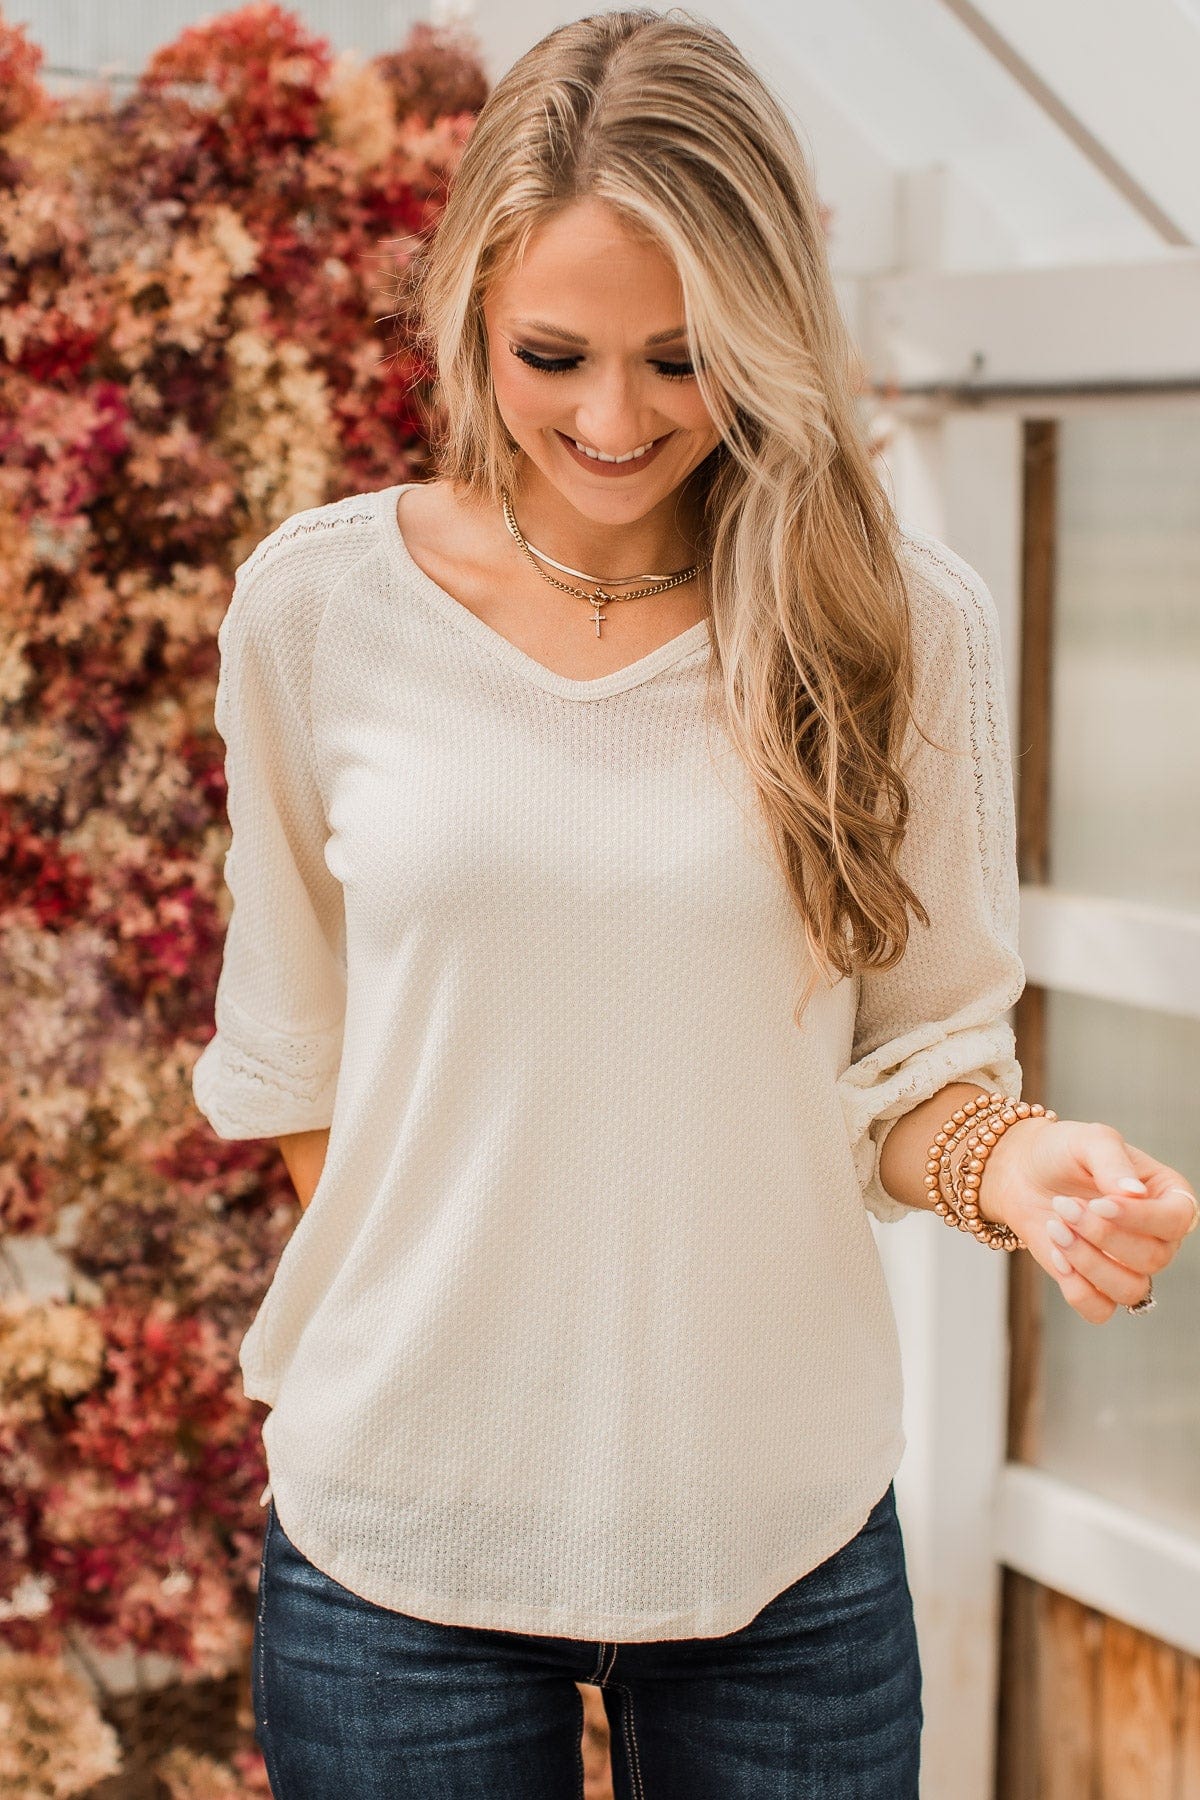 Destined To Charm Knit Top- Cream